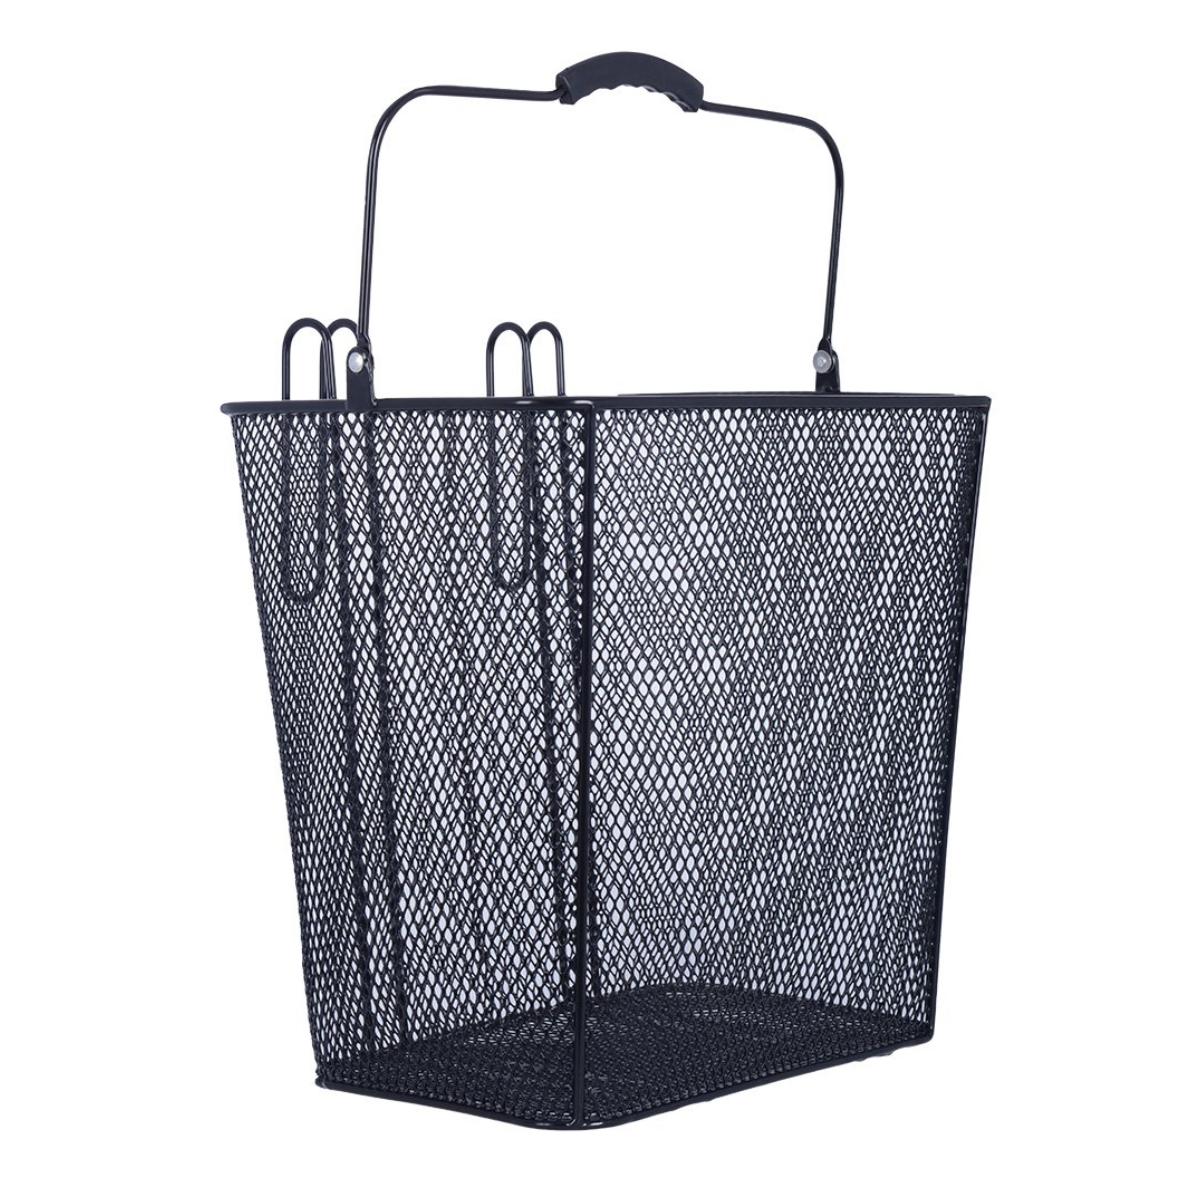 Oxford Basket in Mesh - Front